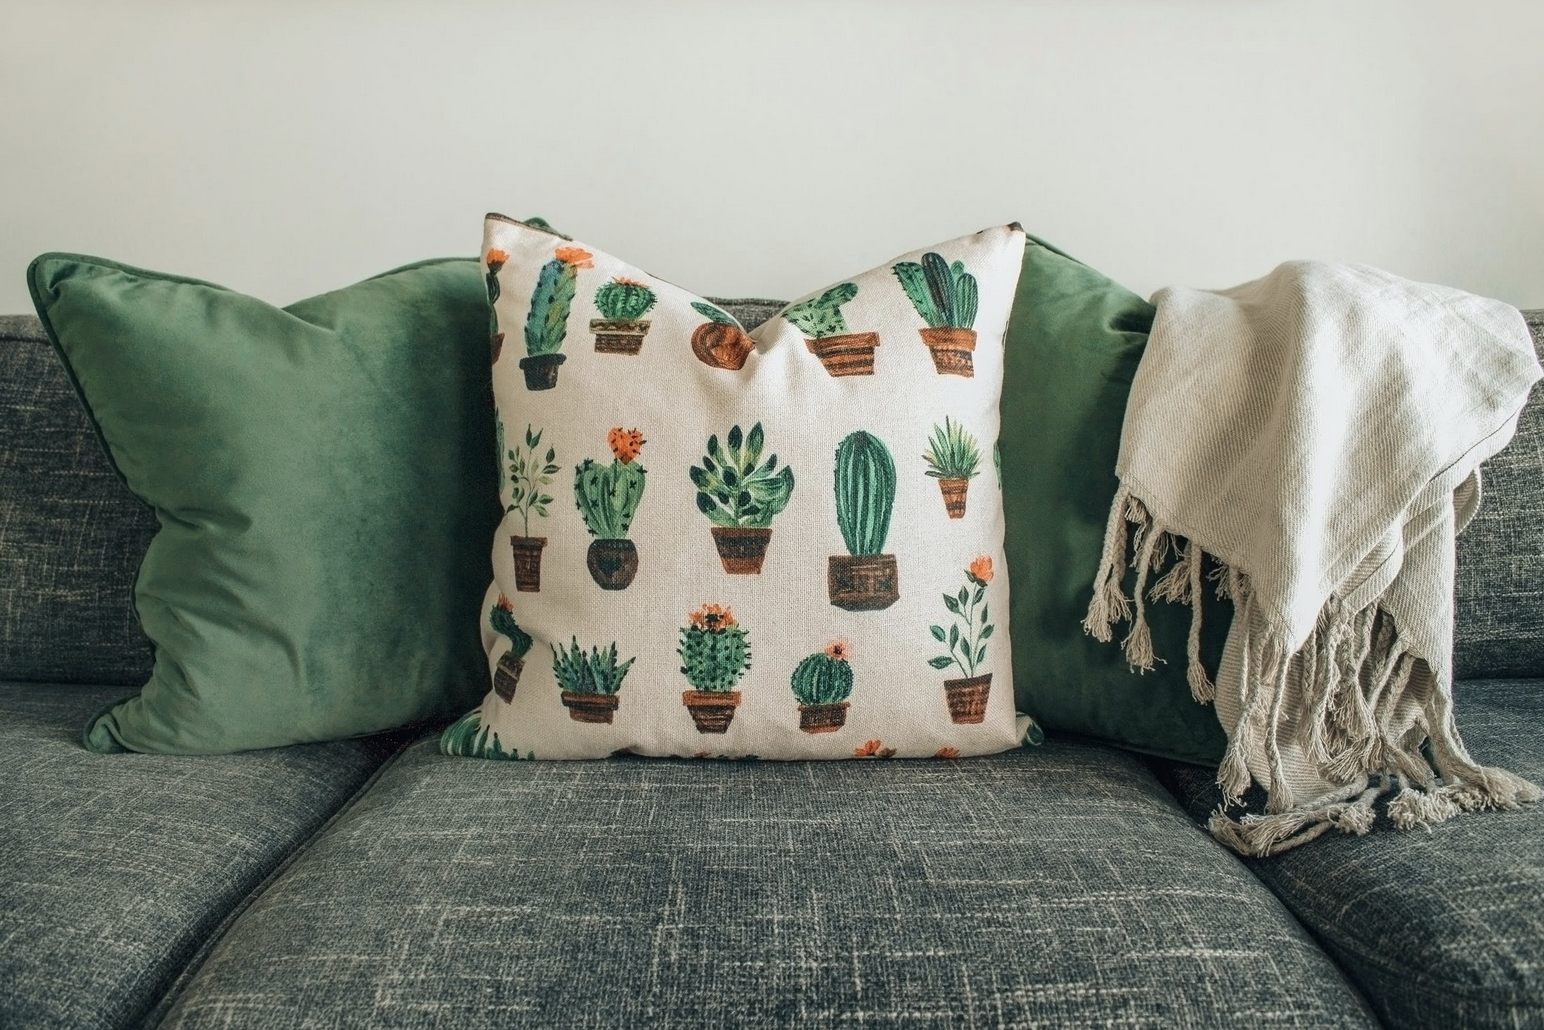 green couch cushions and pillows